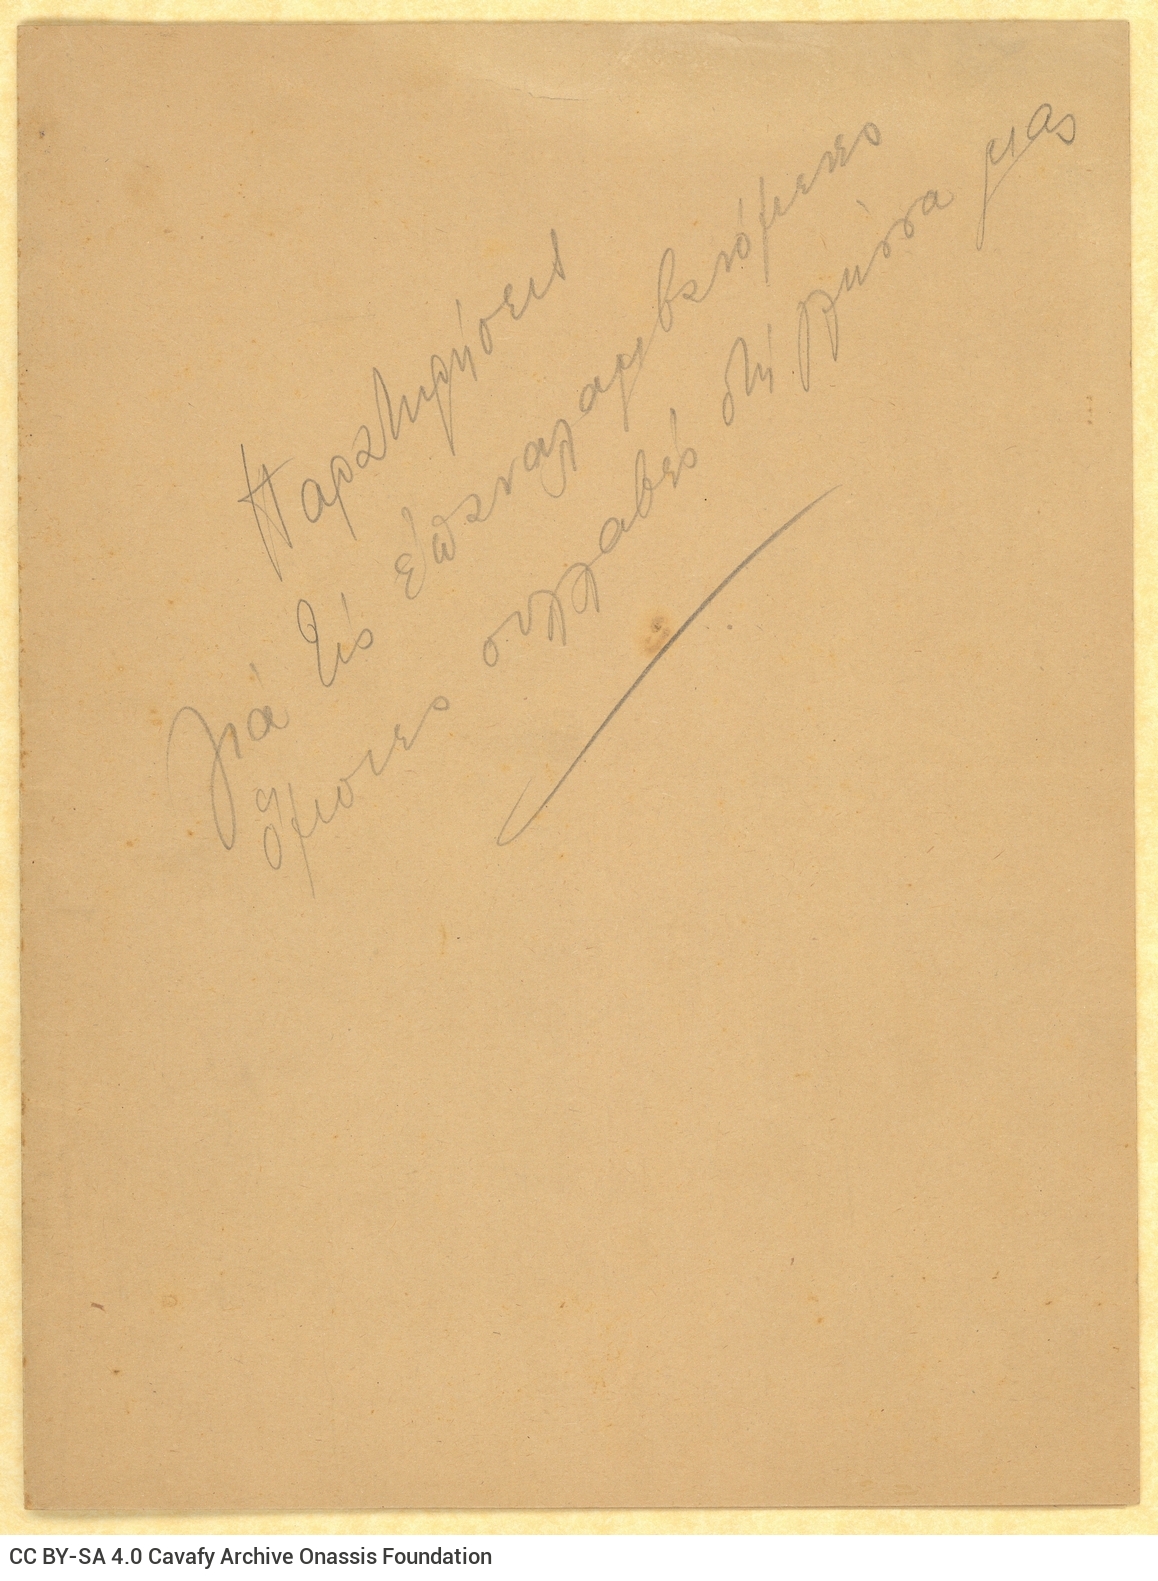 Handmade paperboard folder with the handwritten note "Remarks on the repeated identical syllables in our language". The ha